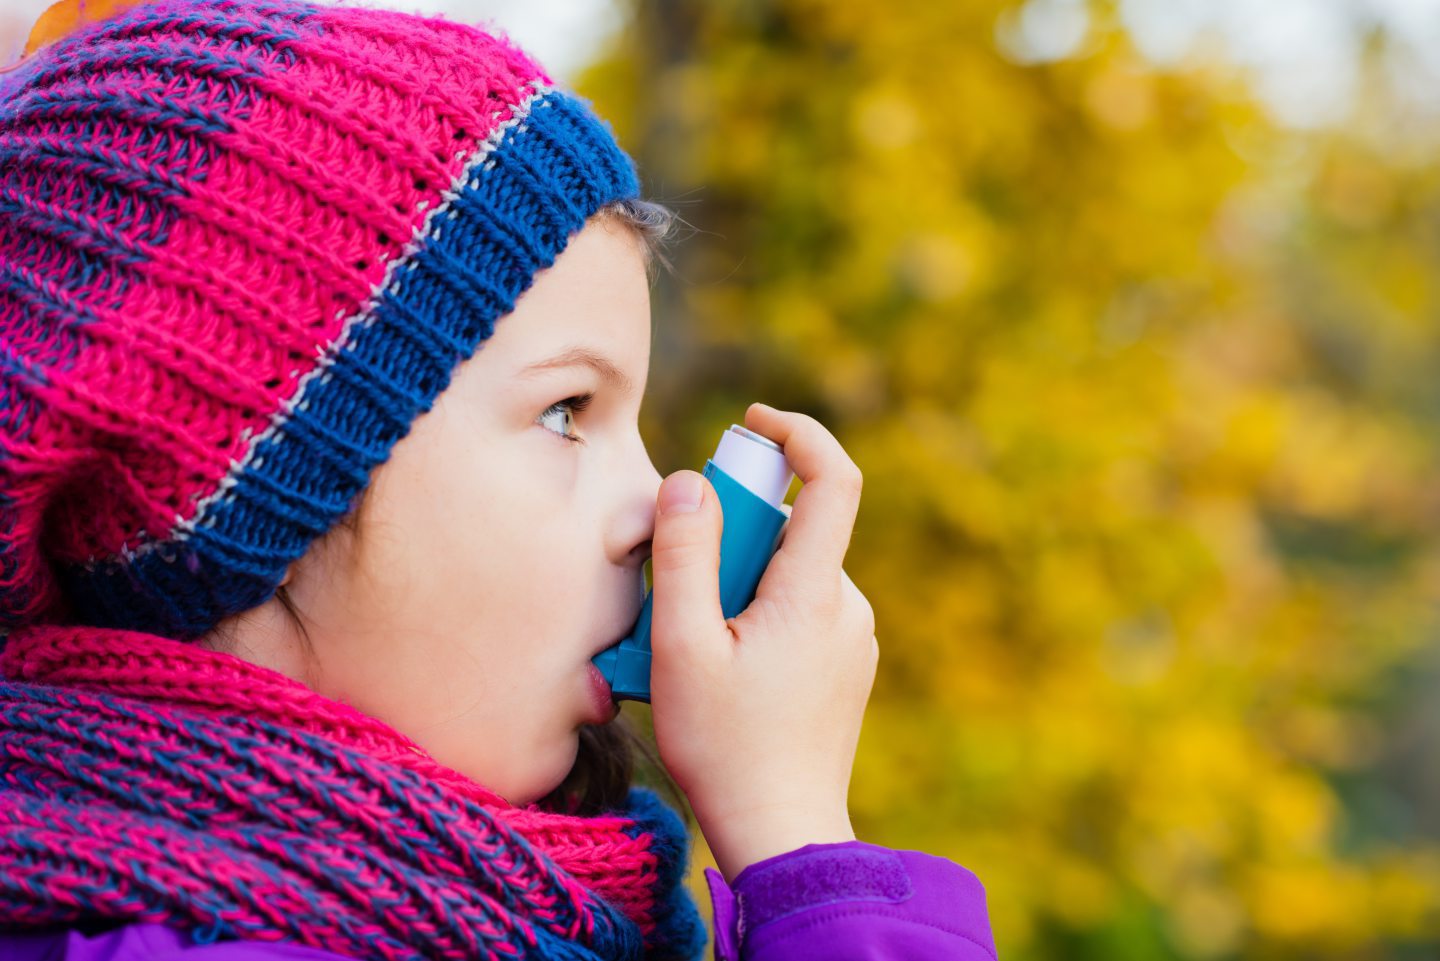 There are concerns the cost of living crisis could make matters worse for children with asthma.